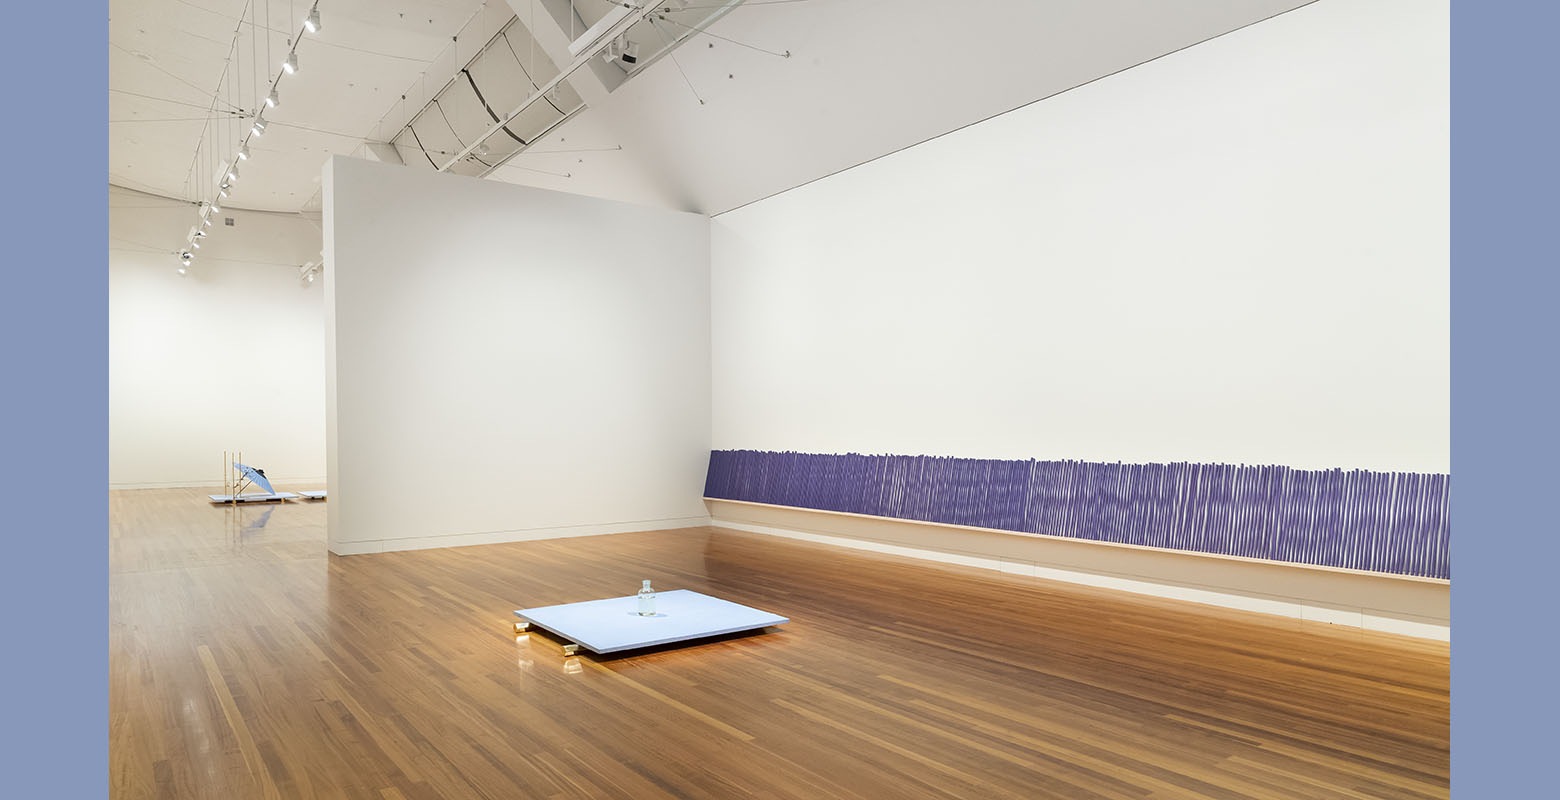 View of an expansive room with white walls and wooden floors. In the foreground, a glass jar filled with water is on a blue platform, sitting on gold hexagonal legs. Lined against the wall is a row of large purple incense sticks.